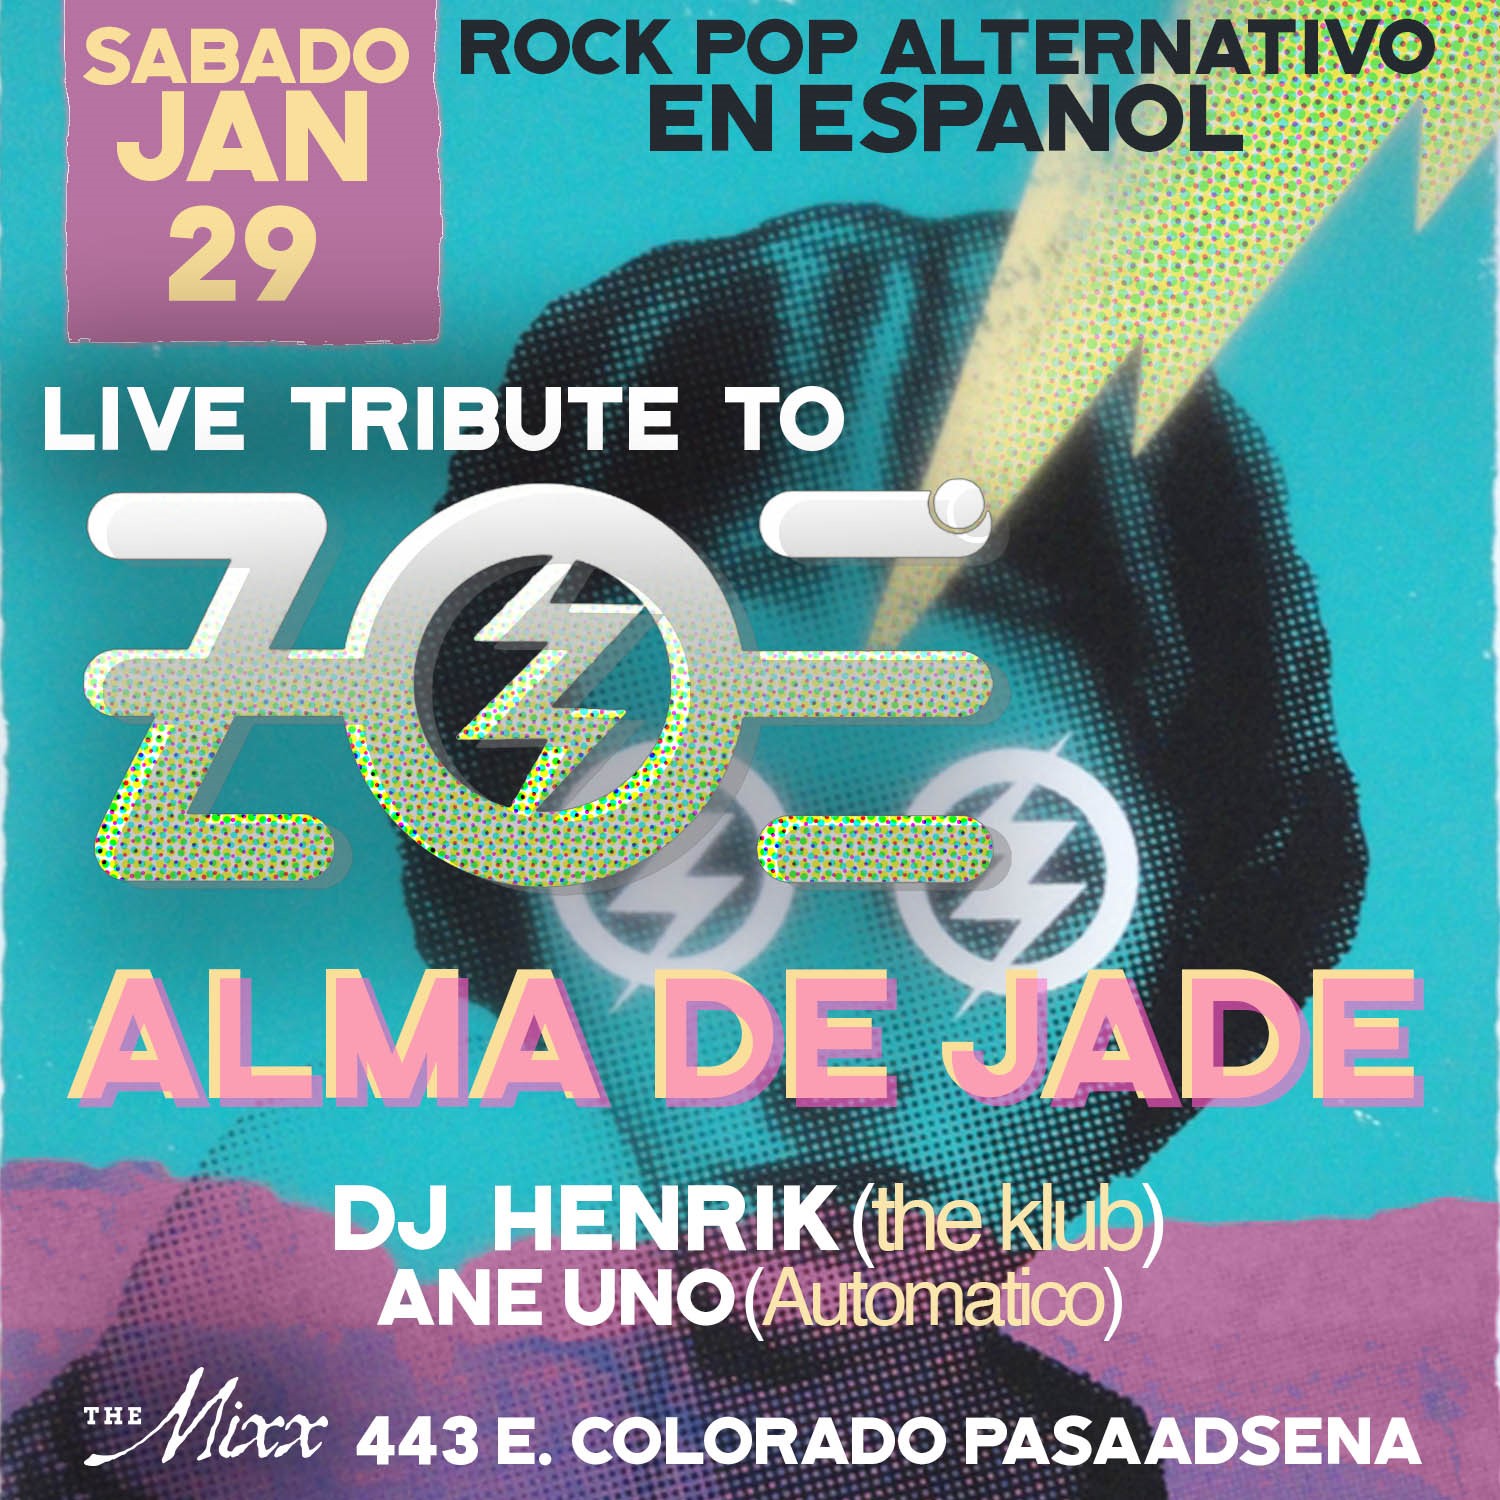 You are currently viewing Live Tribute to Zoé and Rock Pop Alternativo en Español